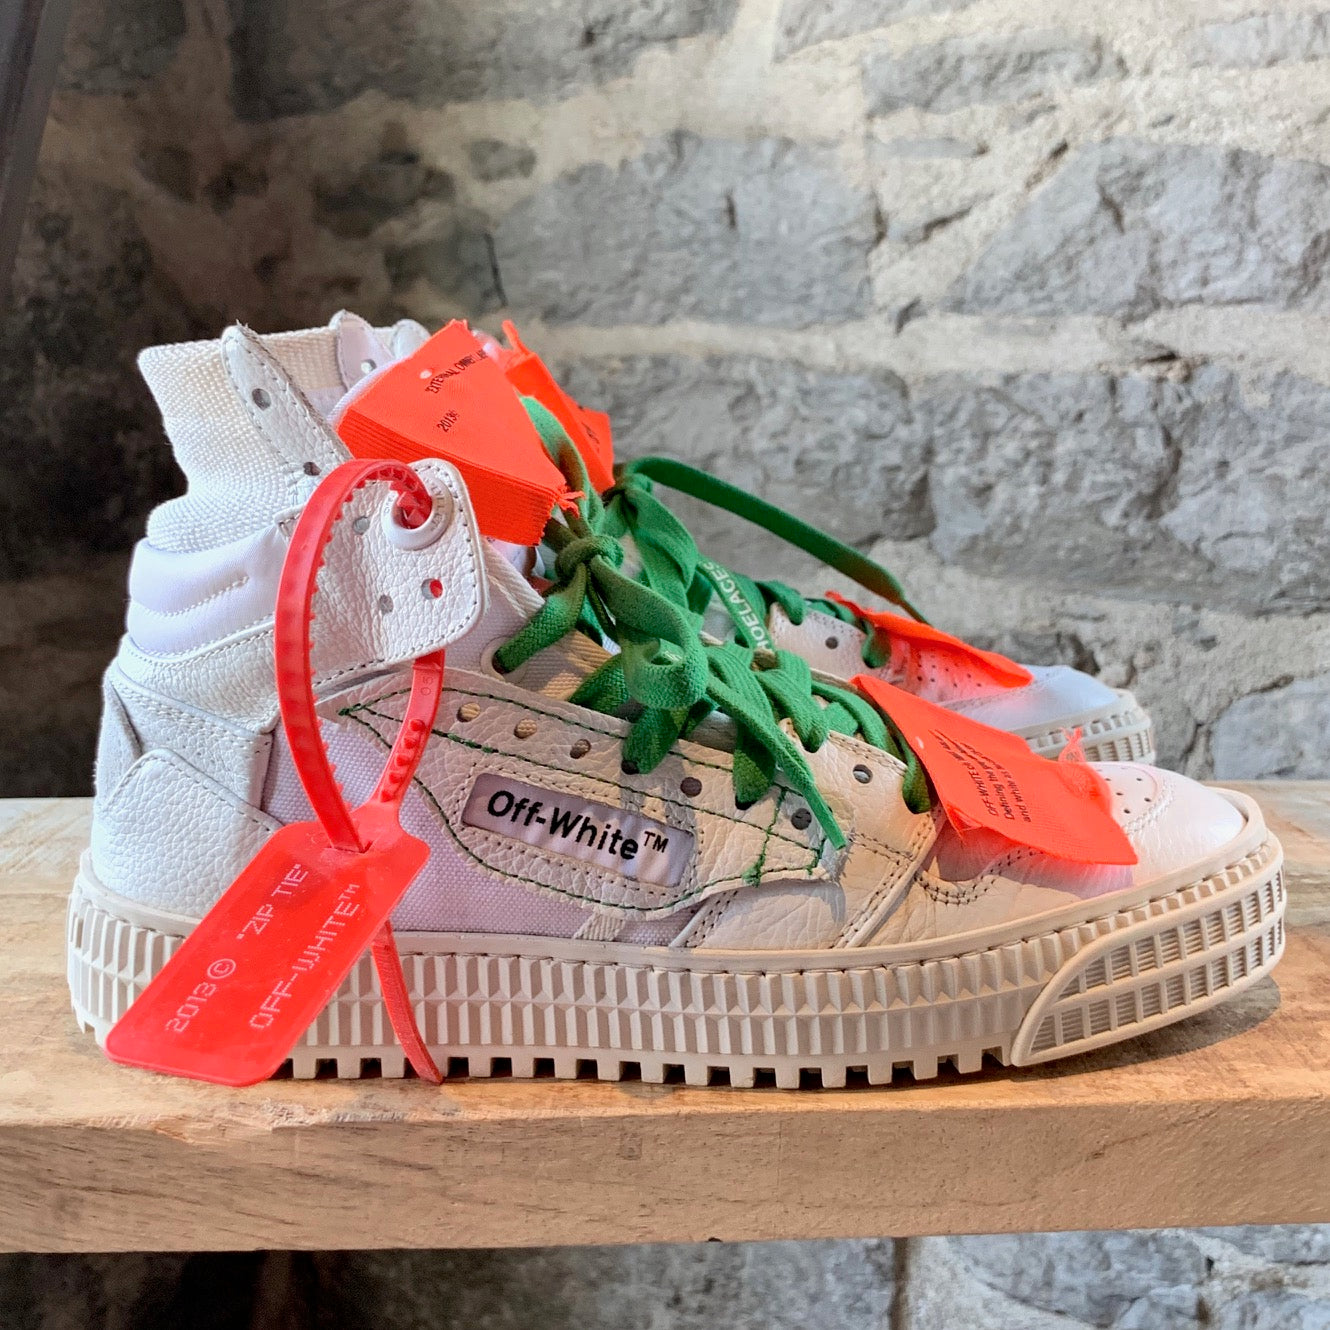 Read Listing BEFORE Responding - LOUIS VUITTON SK8 SKATE SNEAKERS BRAND NEW  VIRGIL ABLOH OFF WHITE for Sale in Houston, TX - OfferUp